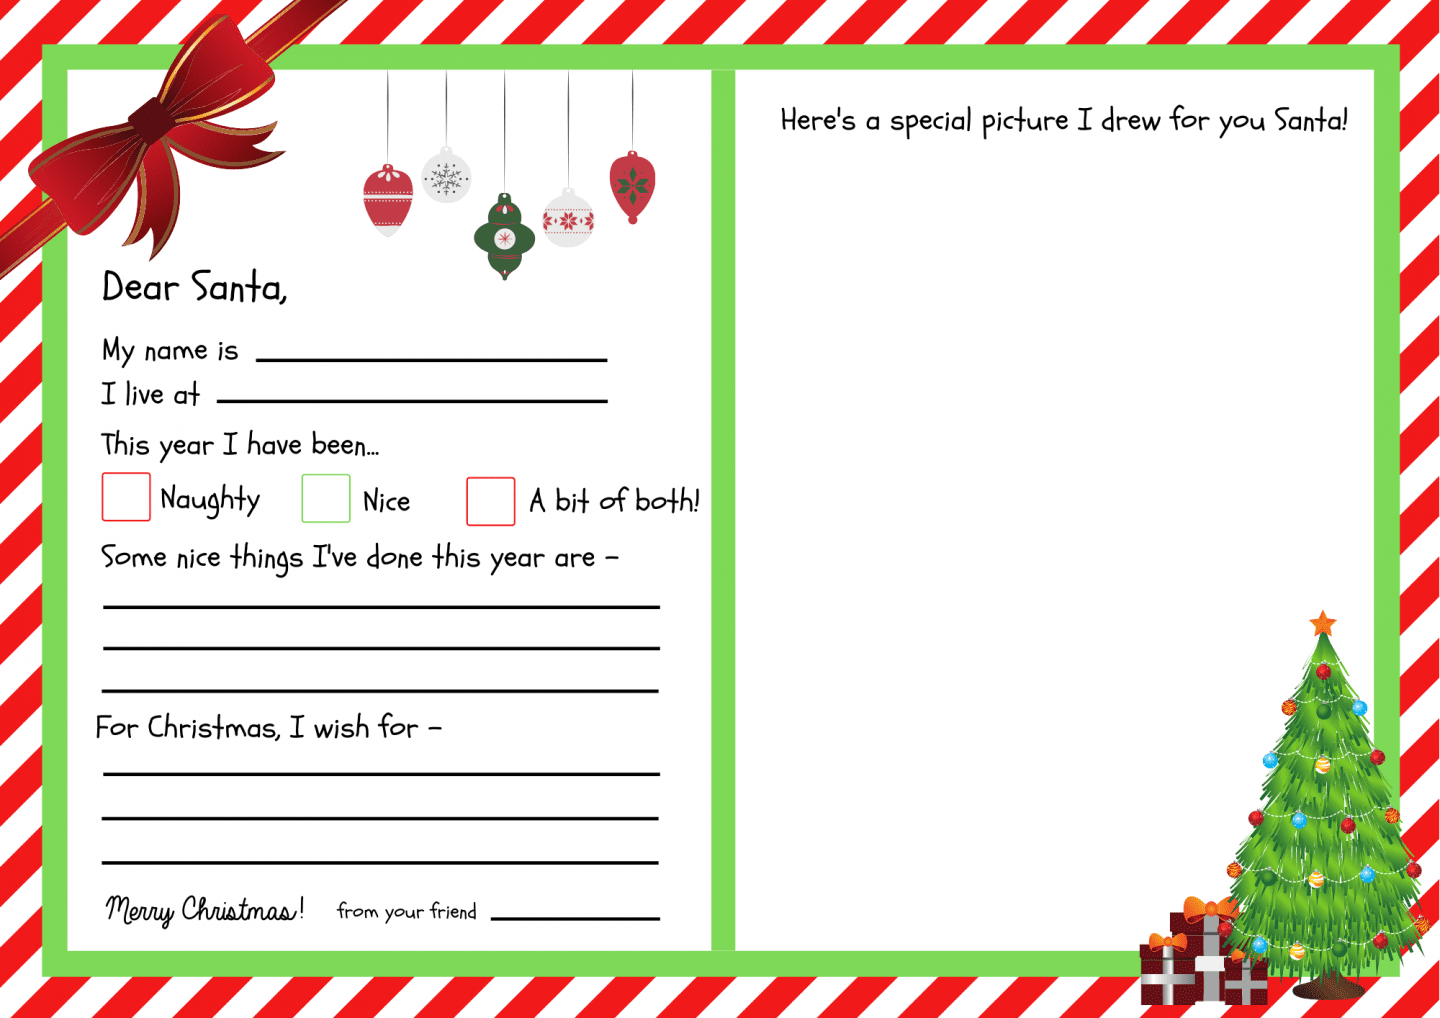 Create your very own personalised letter from Santa and experience the magic of Christmas. Simply download our free letter and envelope template & designs.
